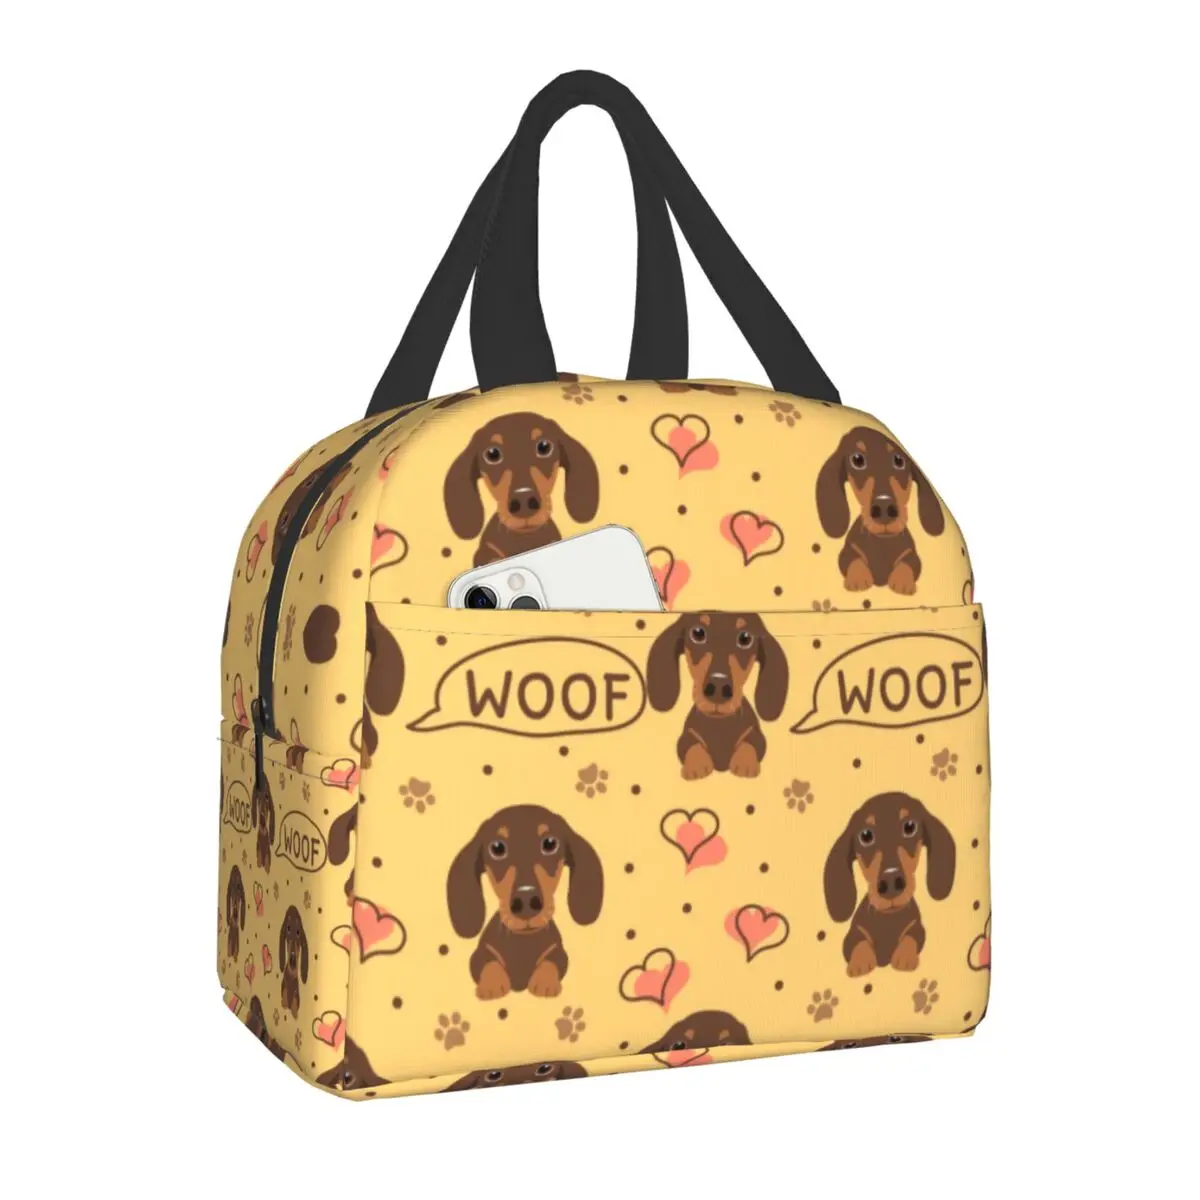 Love Woof Dachshund Sausage Dog Insulated Lunch Bag for School Office Wiener Badger Dogs Thermal Cooler Lunch Box Women Men